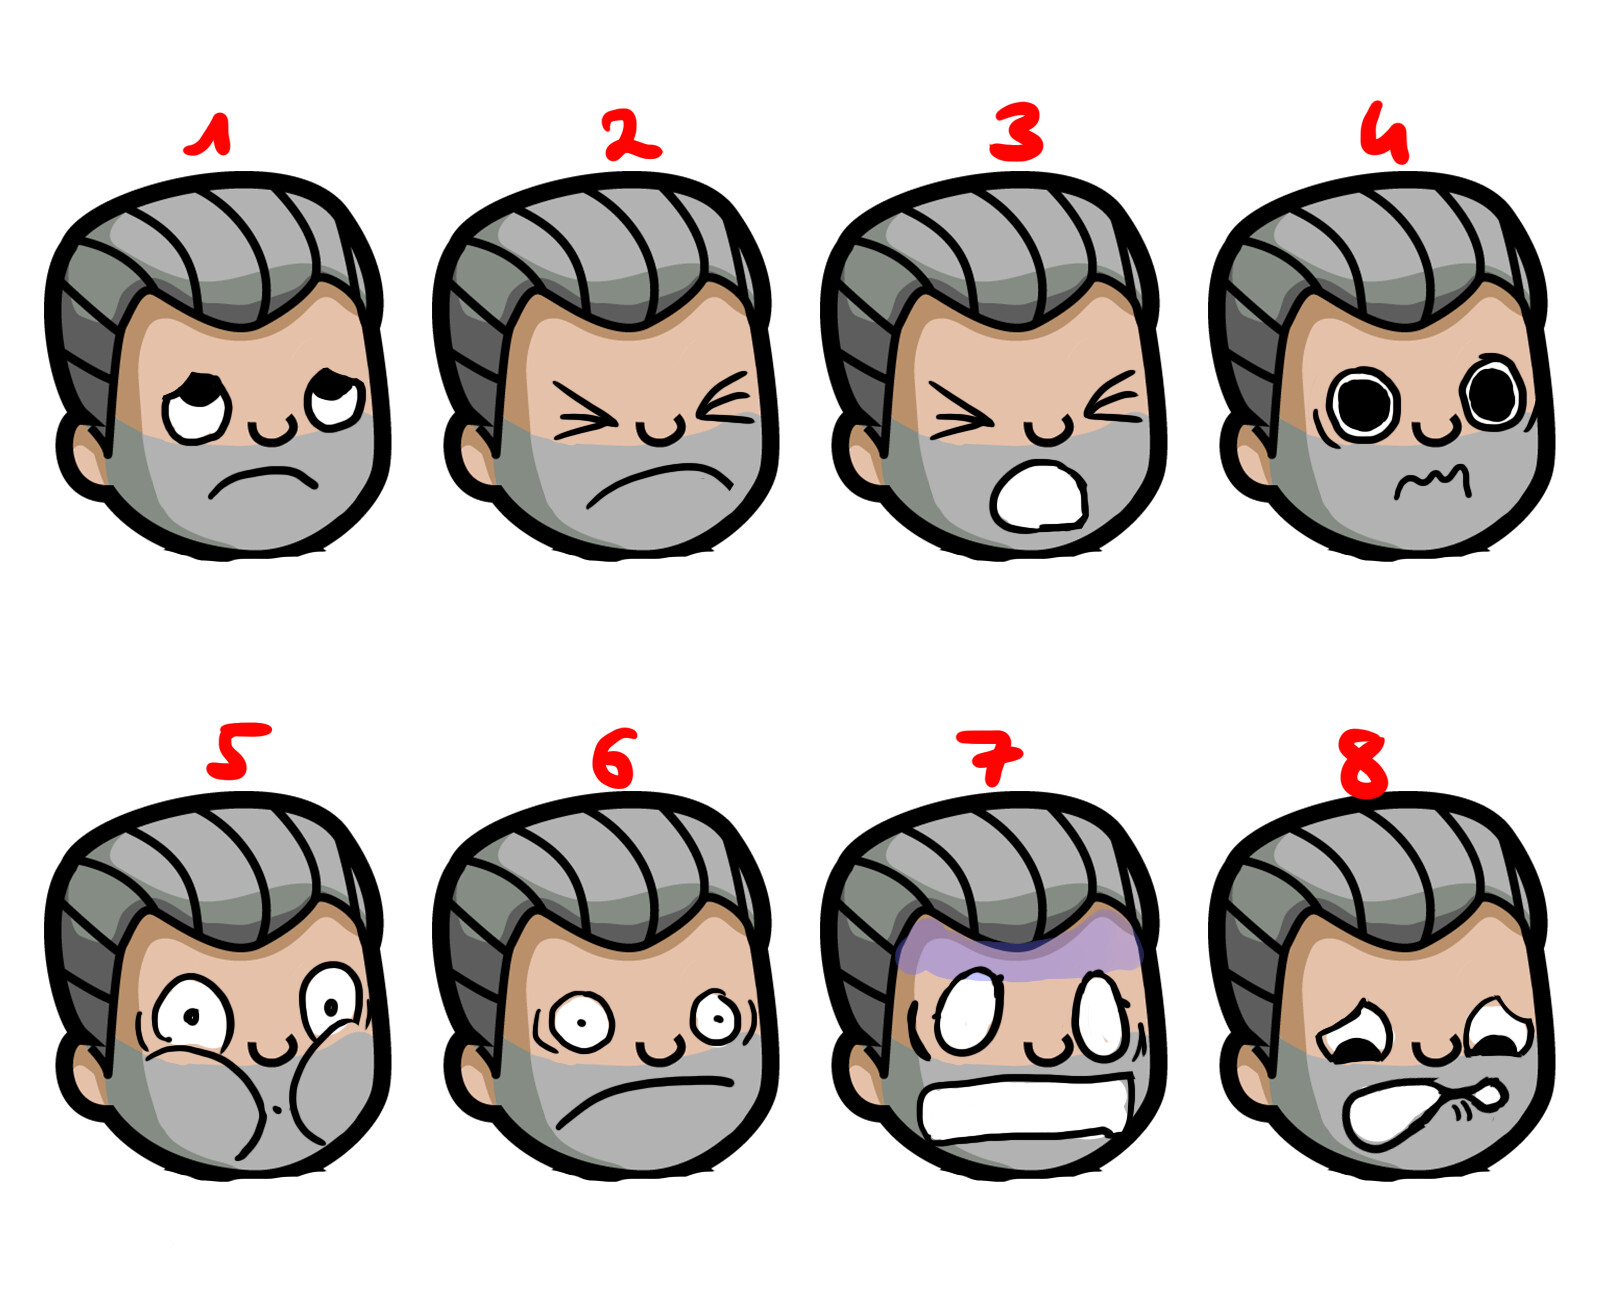 Ideas for Idle Miner Tycoon. How can Idle Miner Tycoon be better